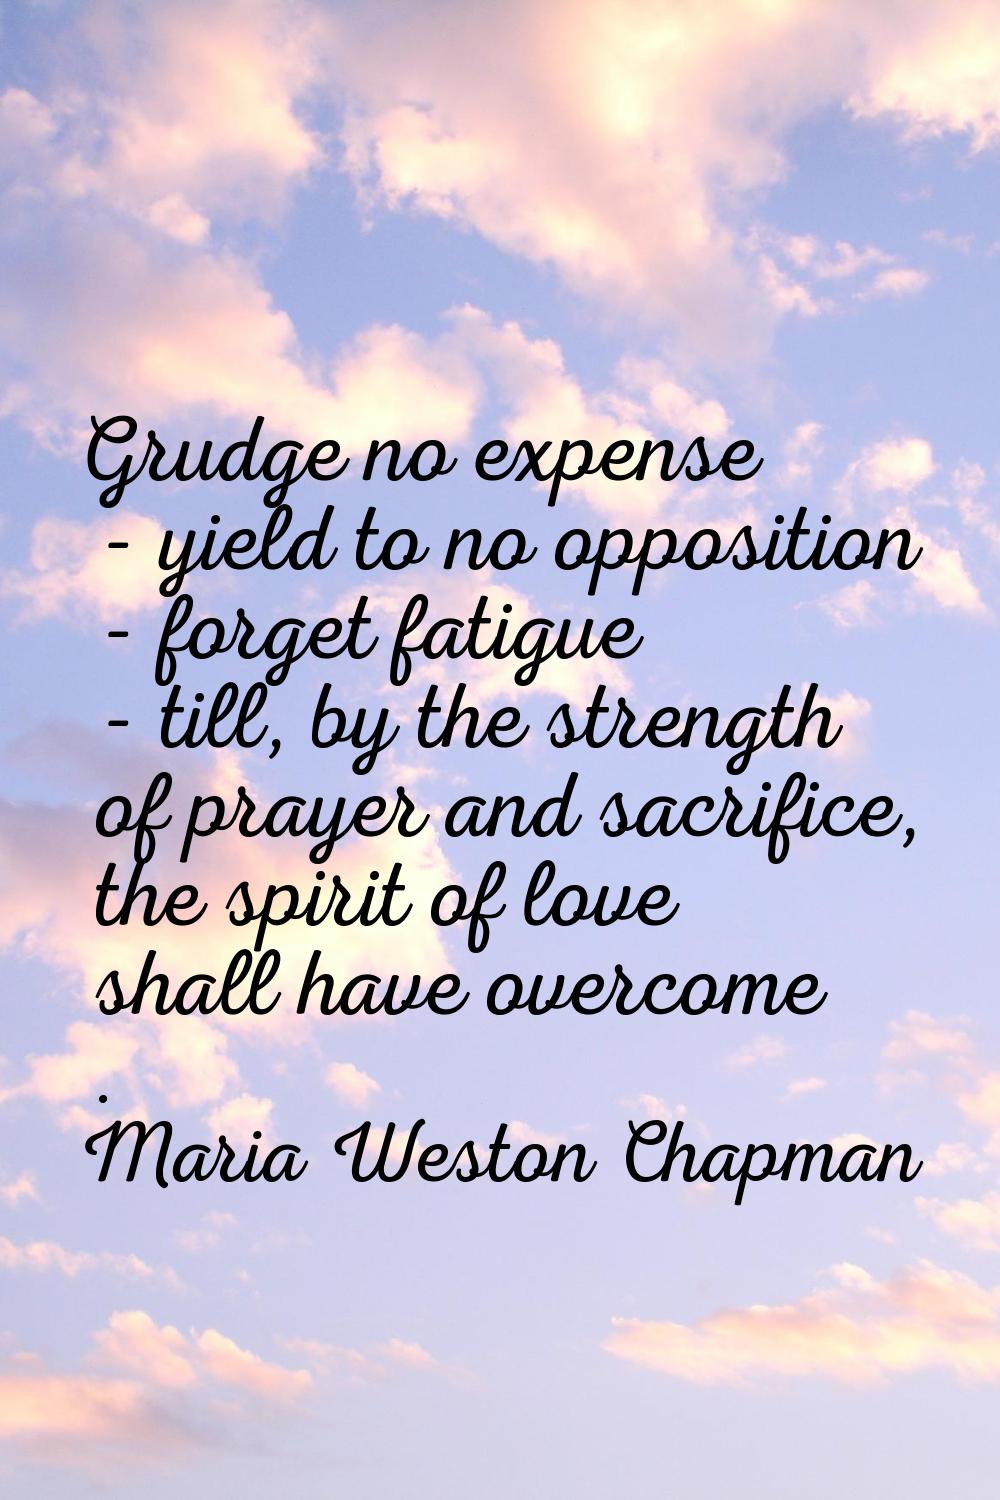 Grudge no expense - yield to no opposition - forget fatigue - till, by the strength of prayer and s